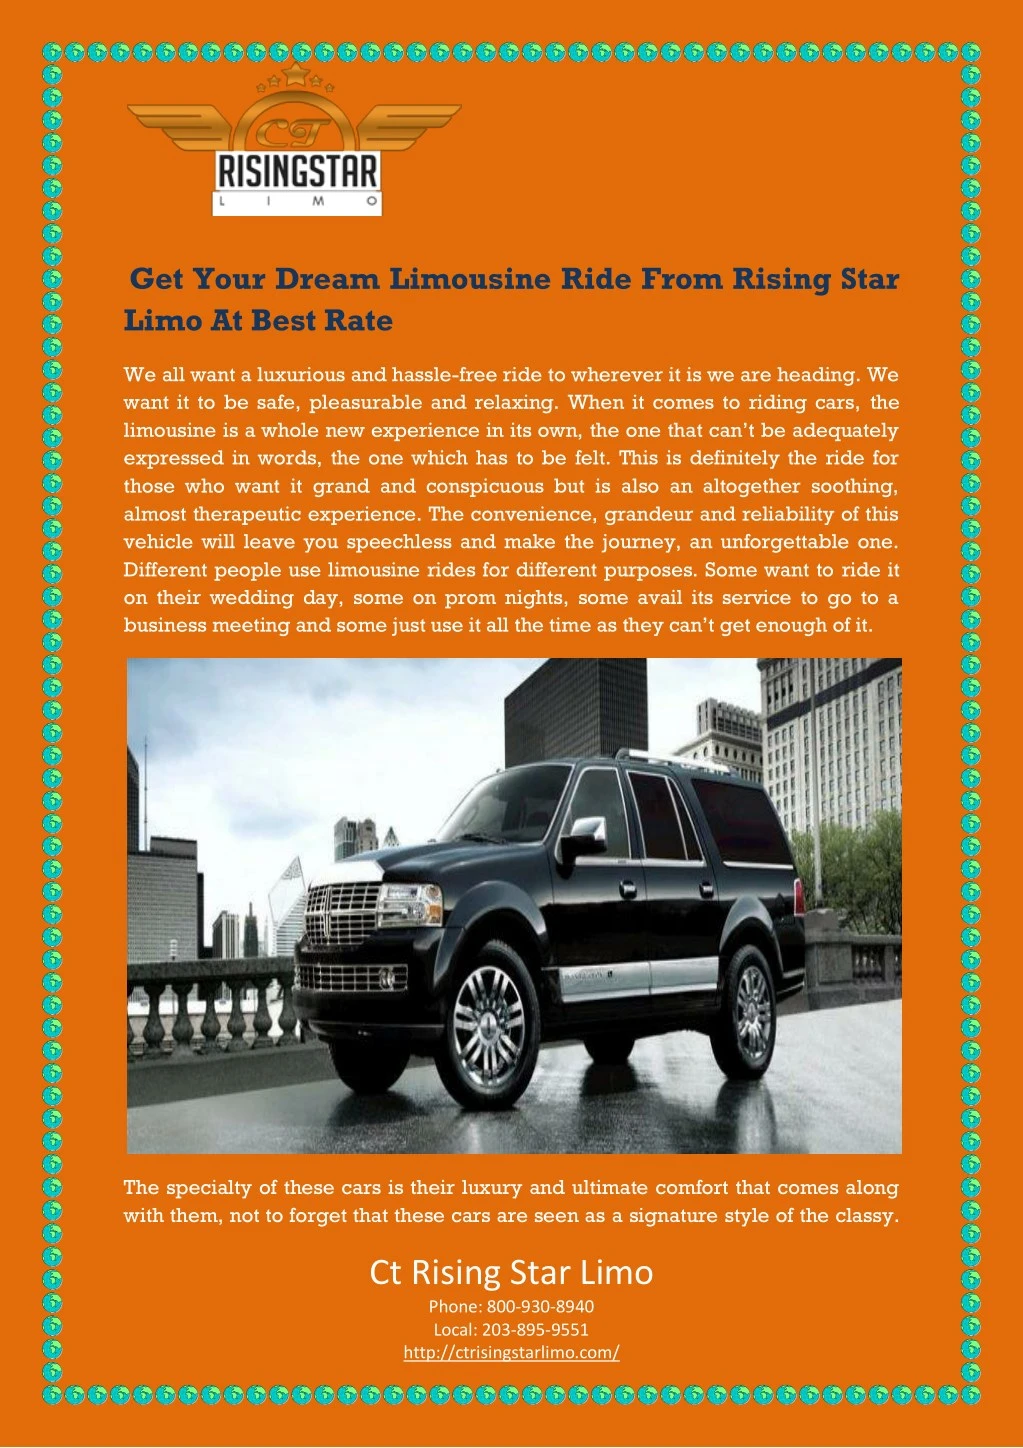 get your dream limousine ride from rising star